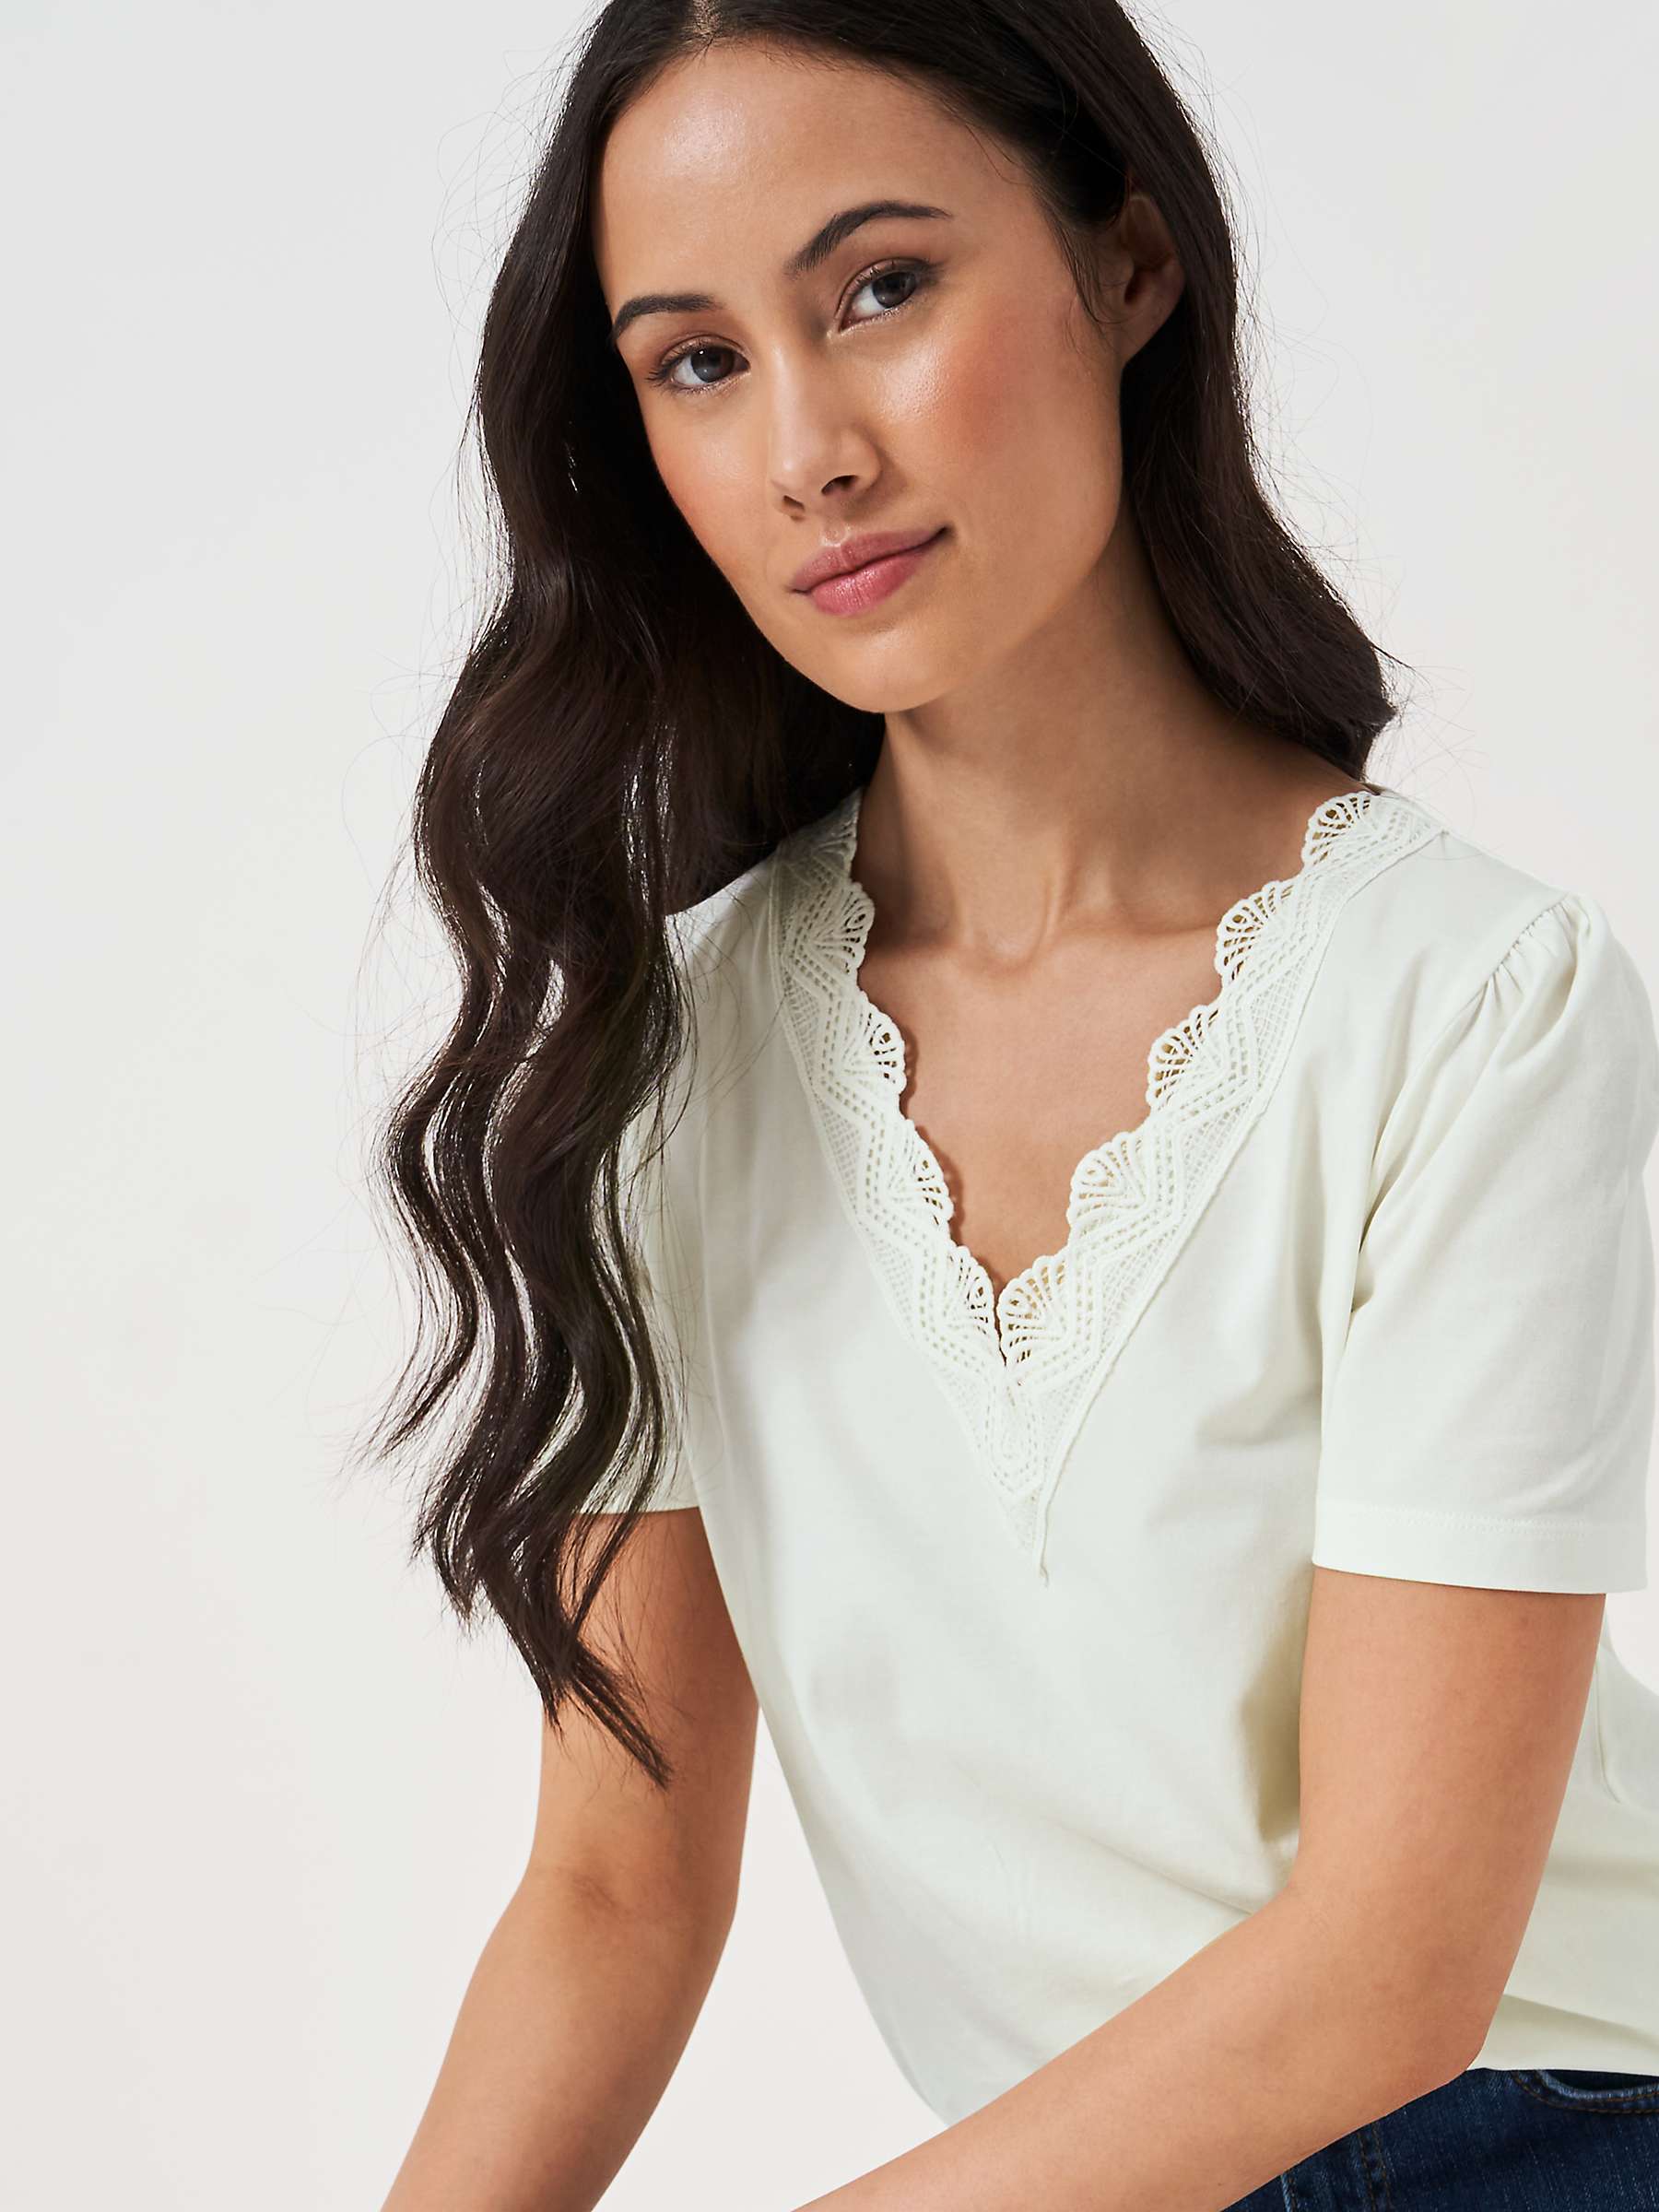 Buy Crew Clothing Lace Neck Short Sleeve Top, White Online at johnlewis.com